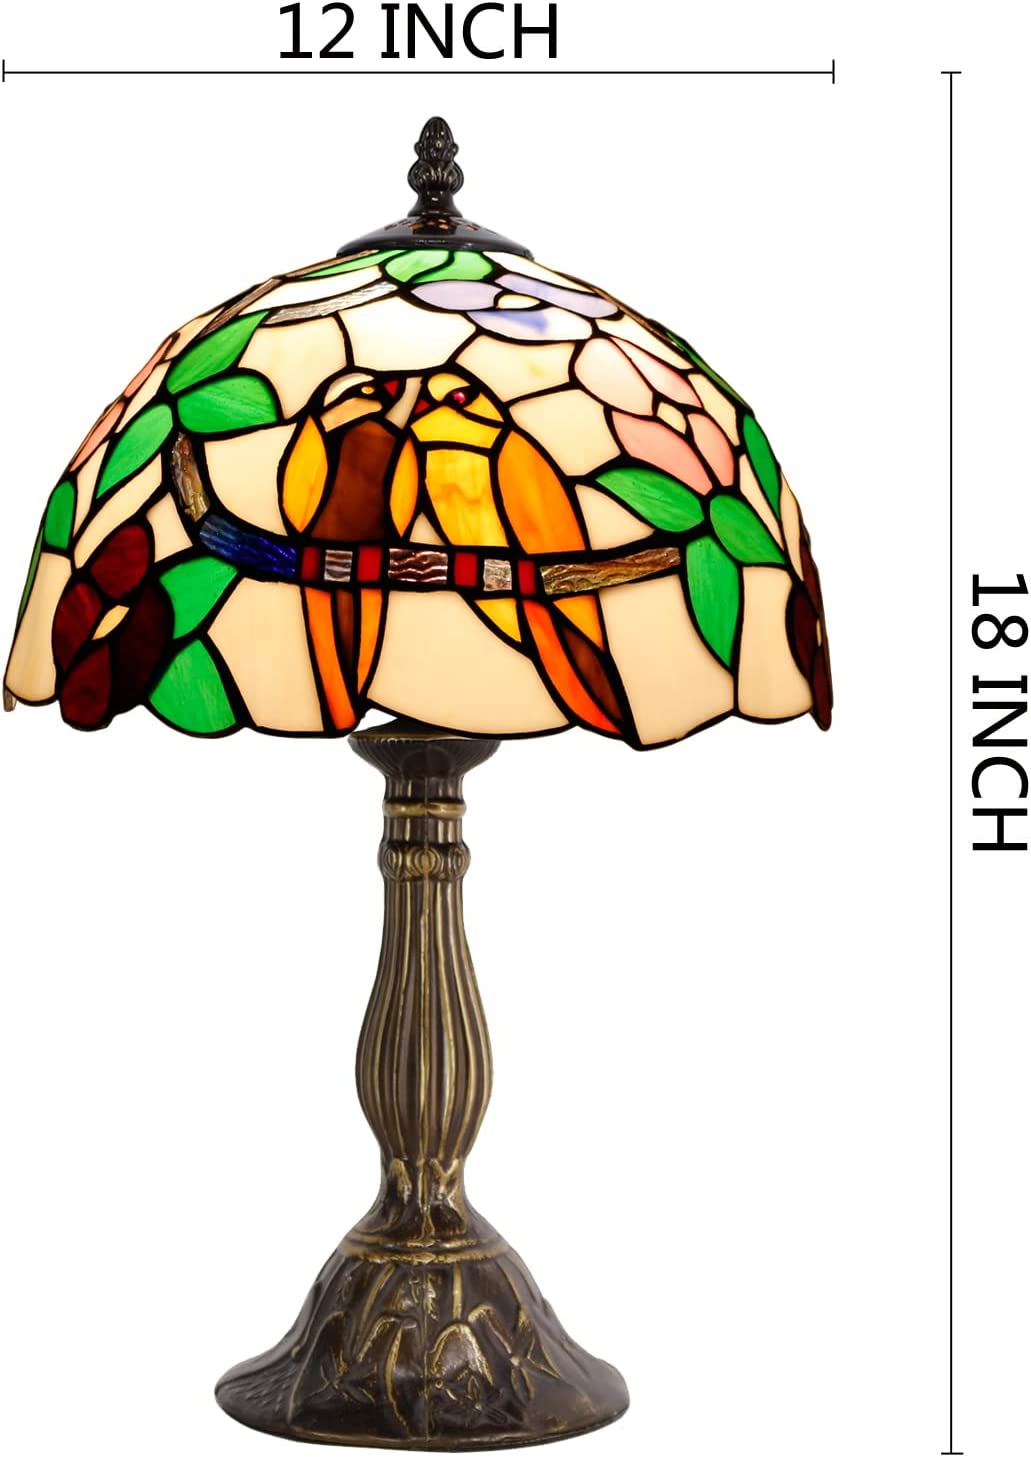 SHADY  Table Lamp Stained Glass Bedside Lamp Double Tropical Birds Desk Reading Light 12X12X18 Inches Decor Bedroom Living Room Home Office S803 Series